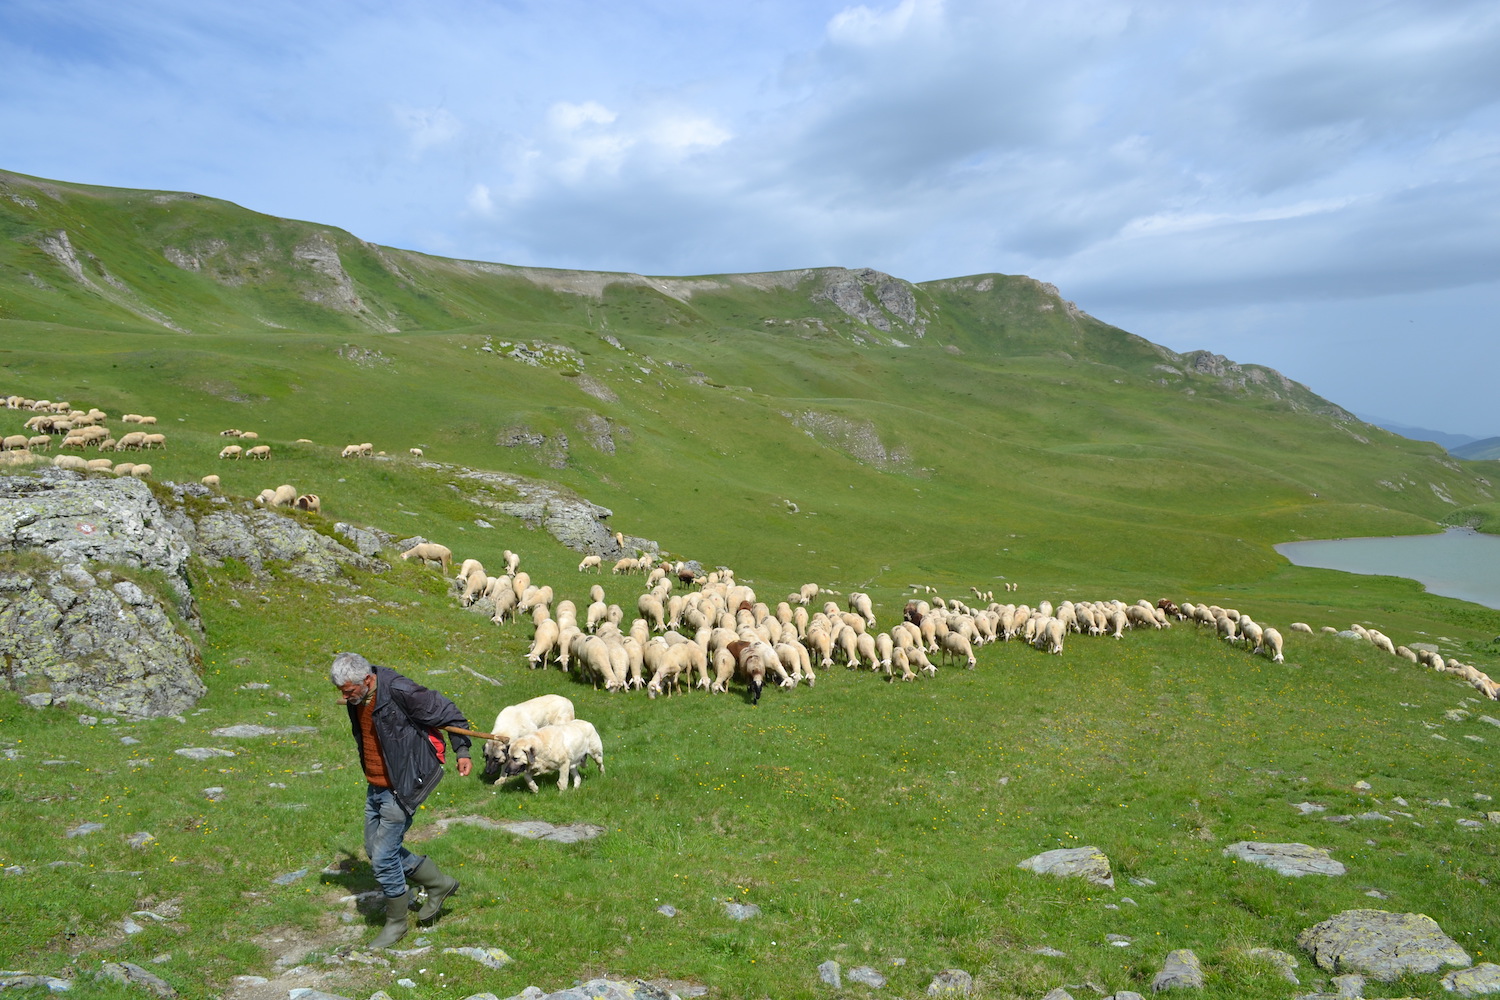 Shepherds take their flock of sheep out to pasture on the Sharr Mountains